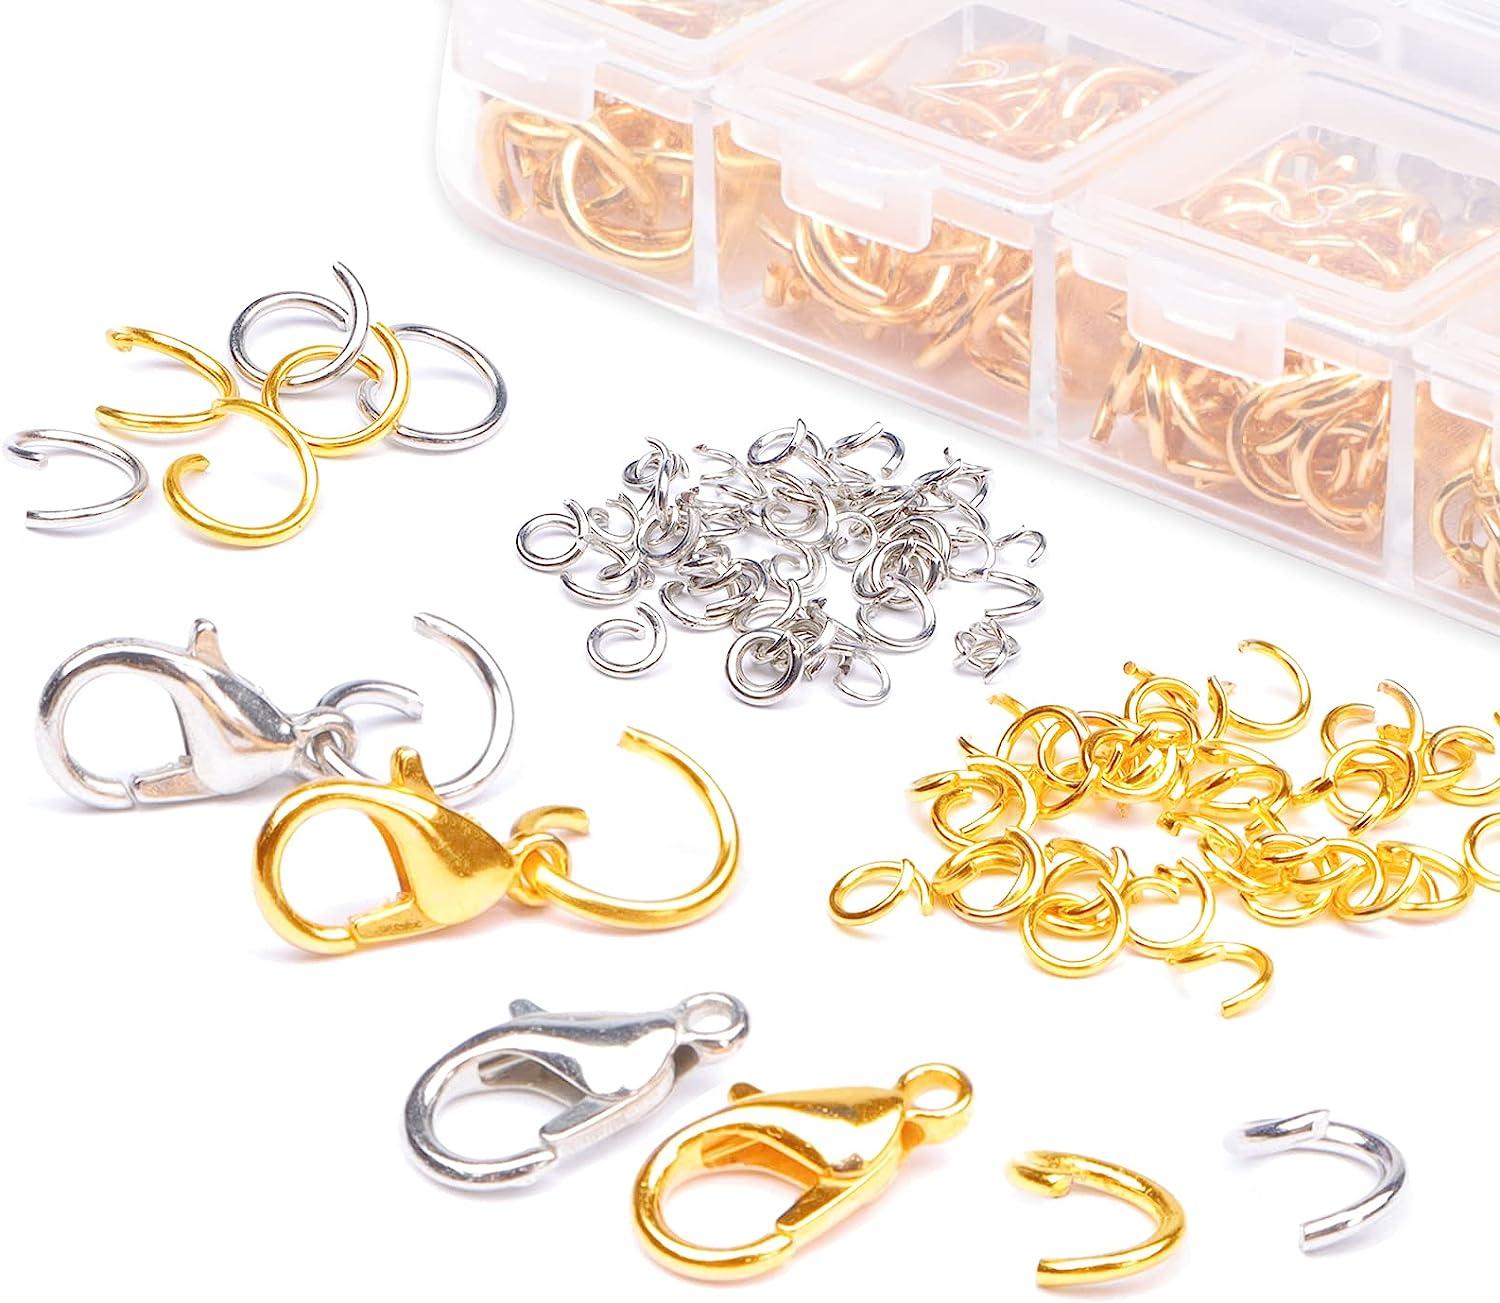  Hohopeti 2pcs Jewelry Connecting Ring Sterling Silver Jewelry  Making Supplies Open Jump Rings Jewelry Repair Kit Jewelry Kit Necklace DIY  Split Ring O Rings S925 Silver Bracelet Accessories